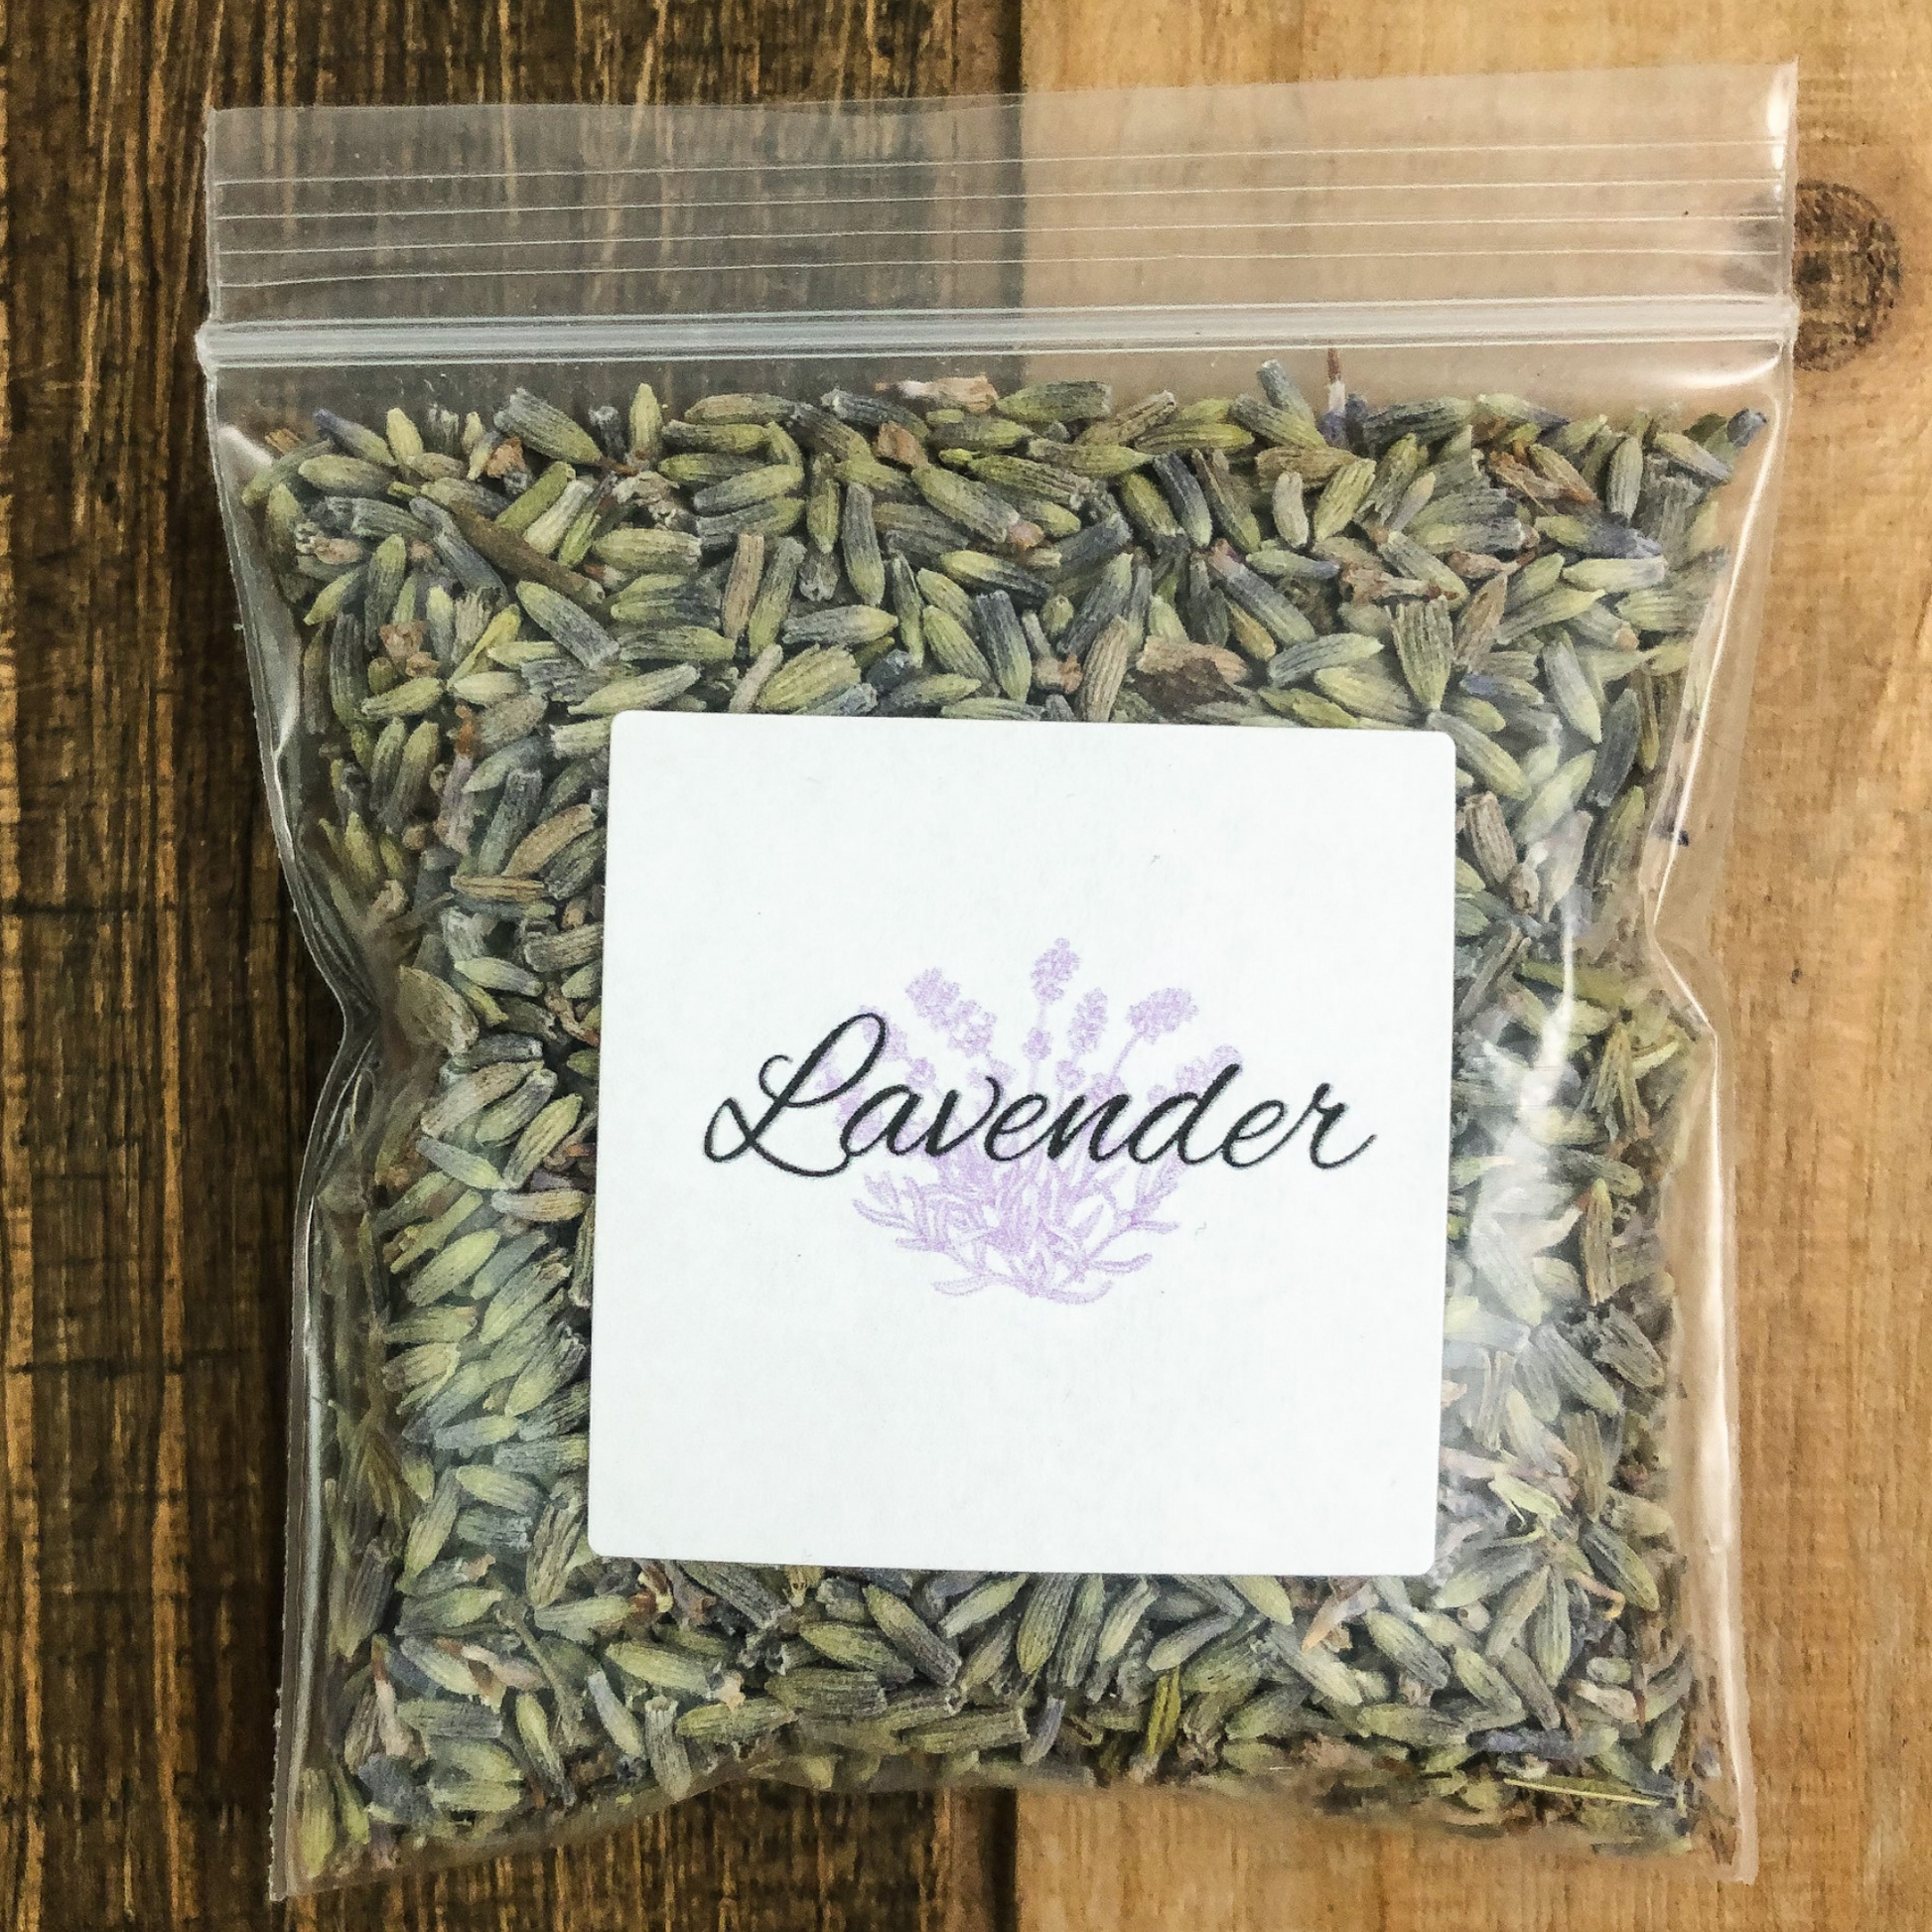 8g bag of dried lavender in a clear plastic bag with a wooden background